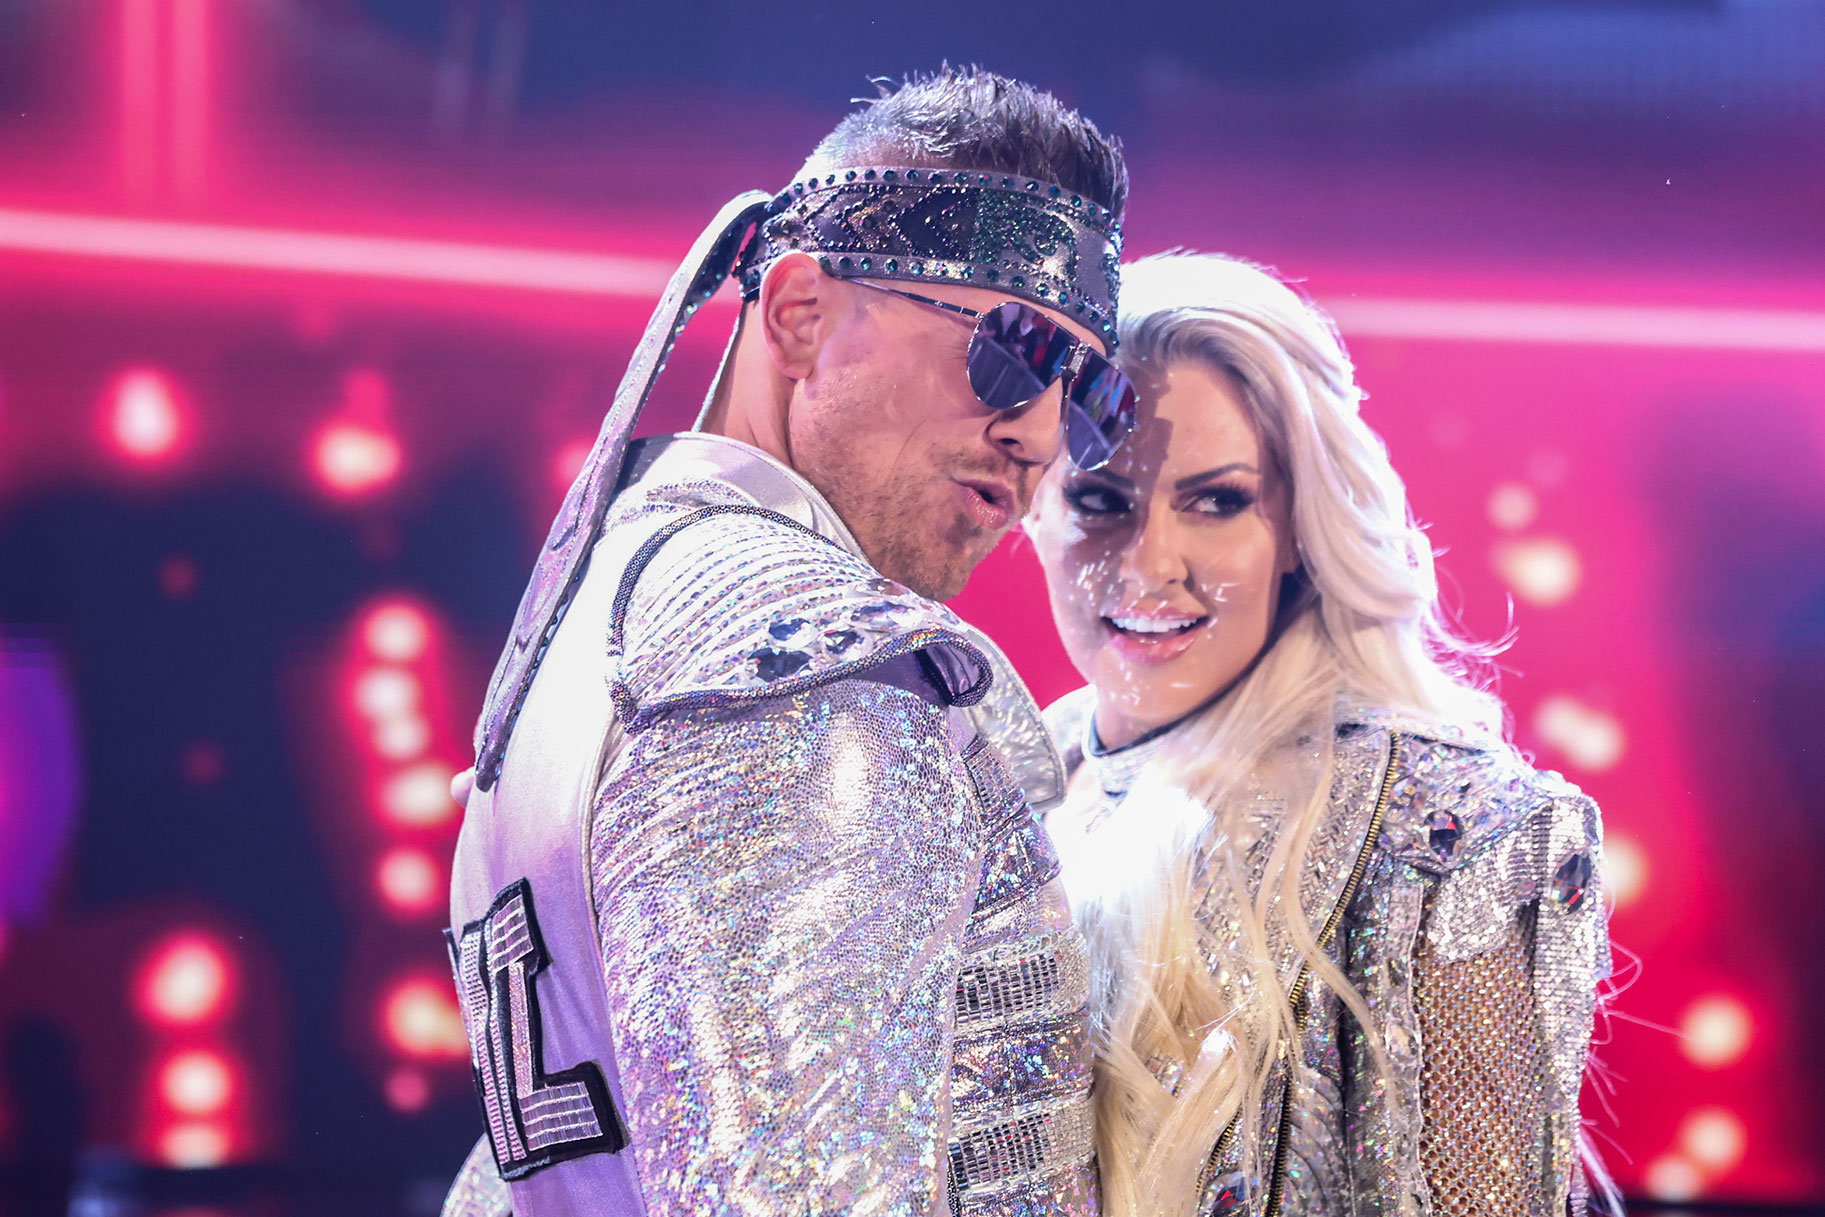 The Miz and Maryse posing together while wearing sparkly silver costumes